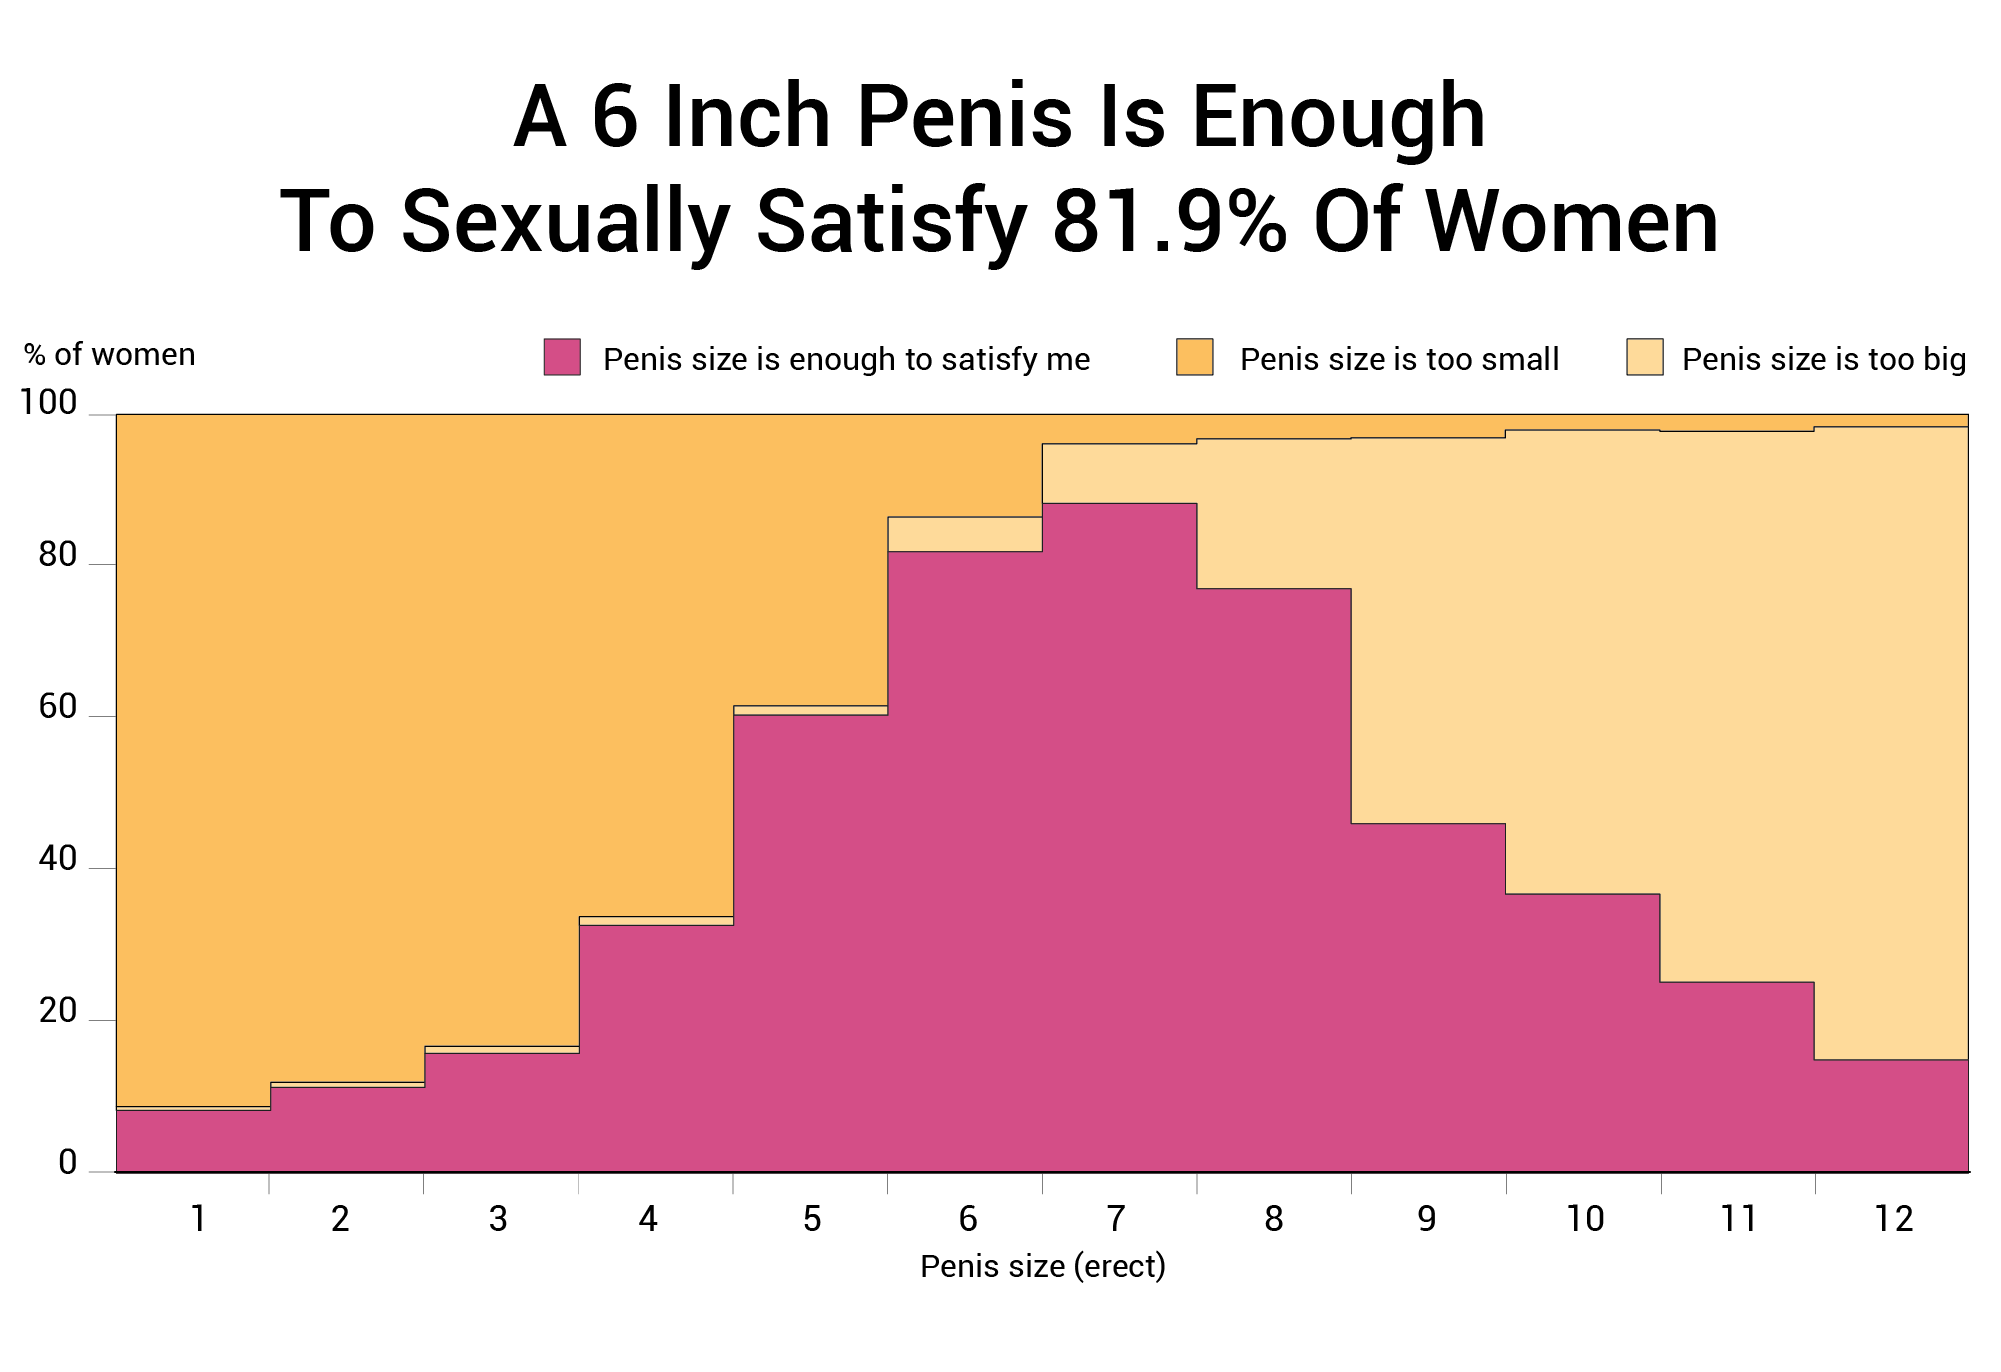 Horny Black Penis 6 Inch - Is 6 Inches Enough Or Too Small [1,387 Woman Study]